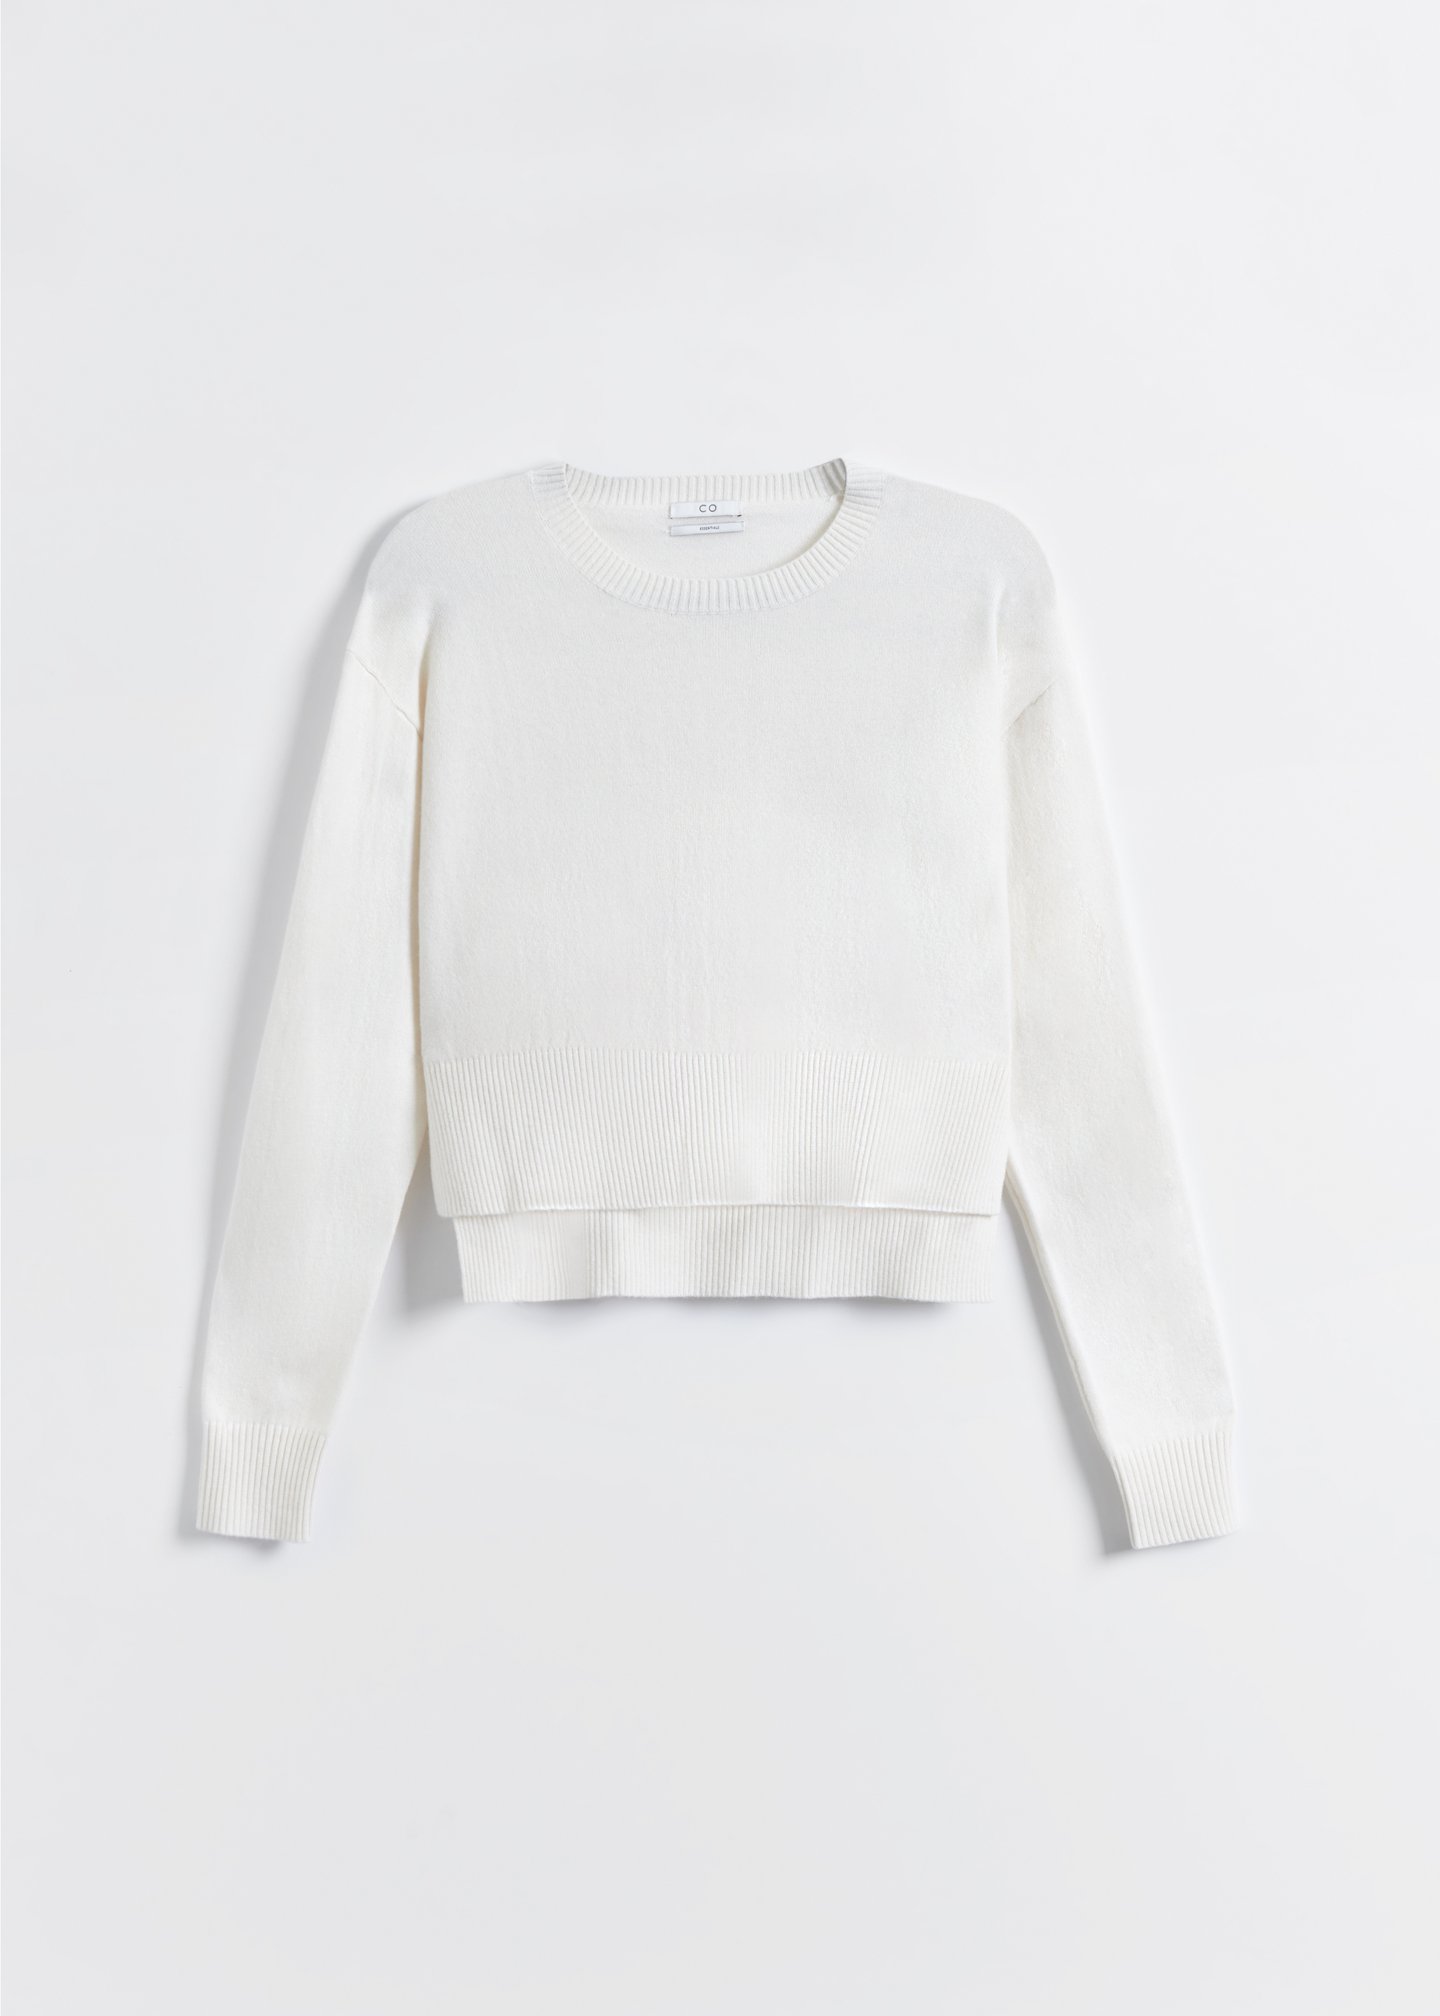 CO - Crewneck Ribbed Sweater in Wool Cashmere - Ivory